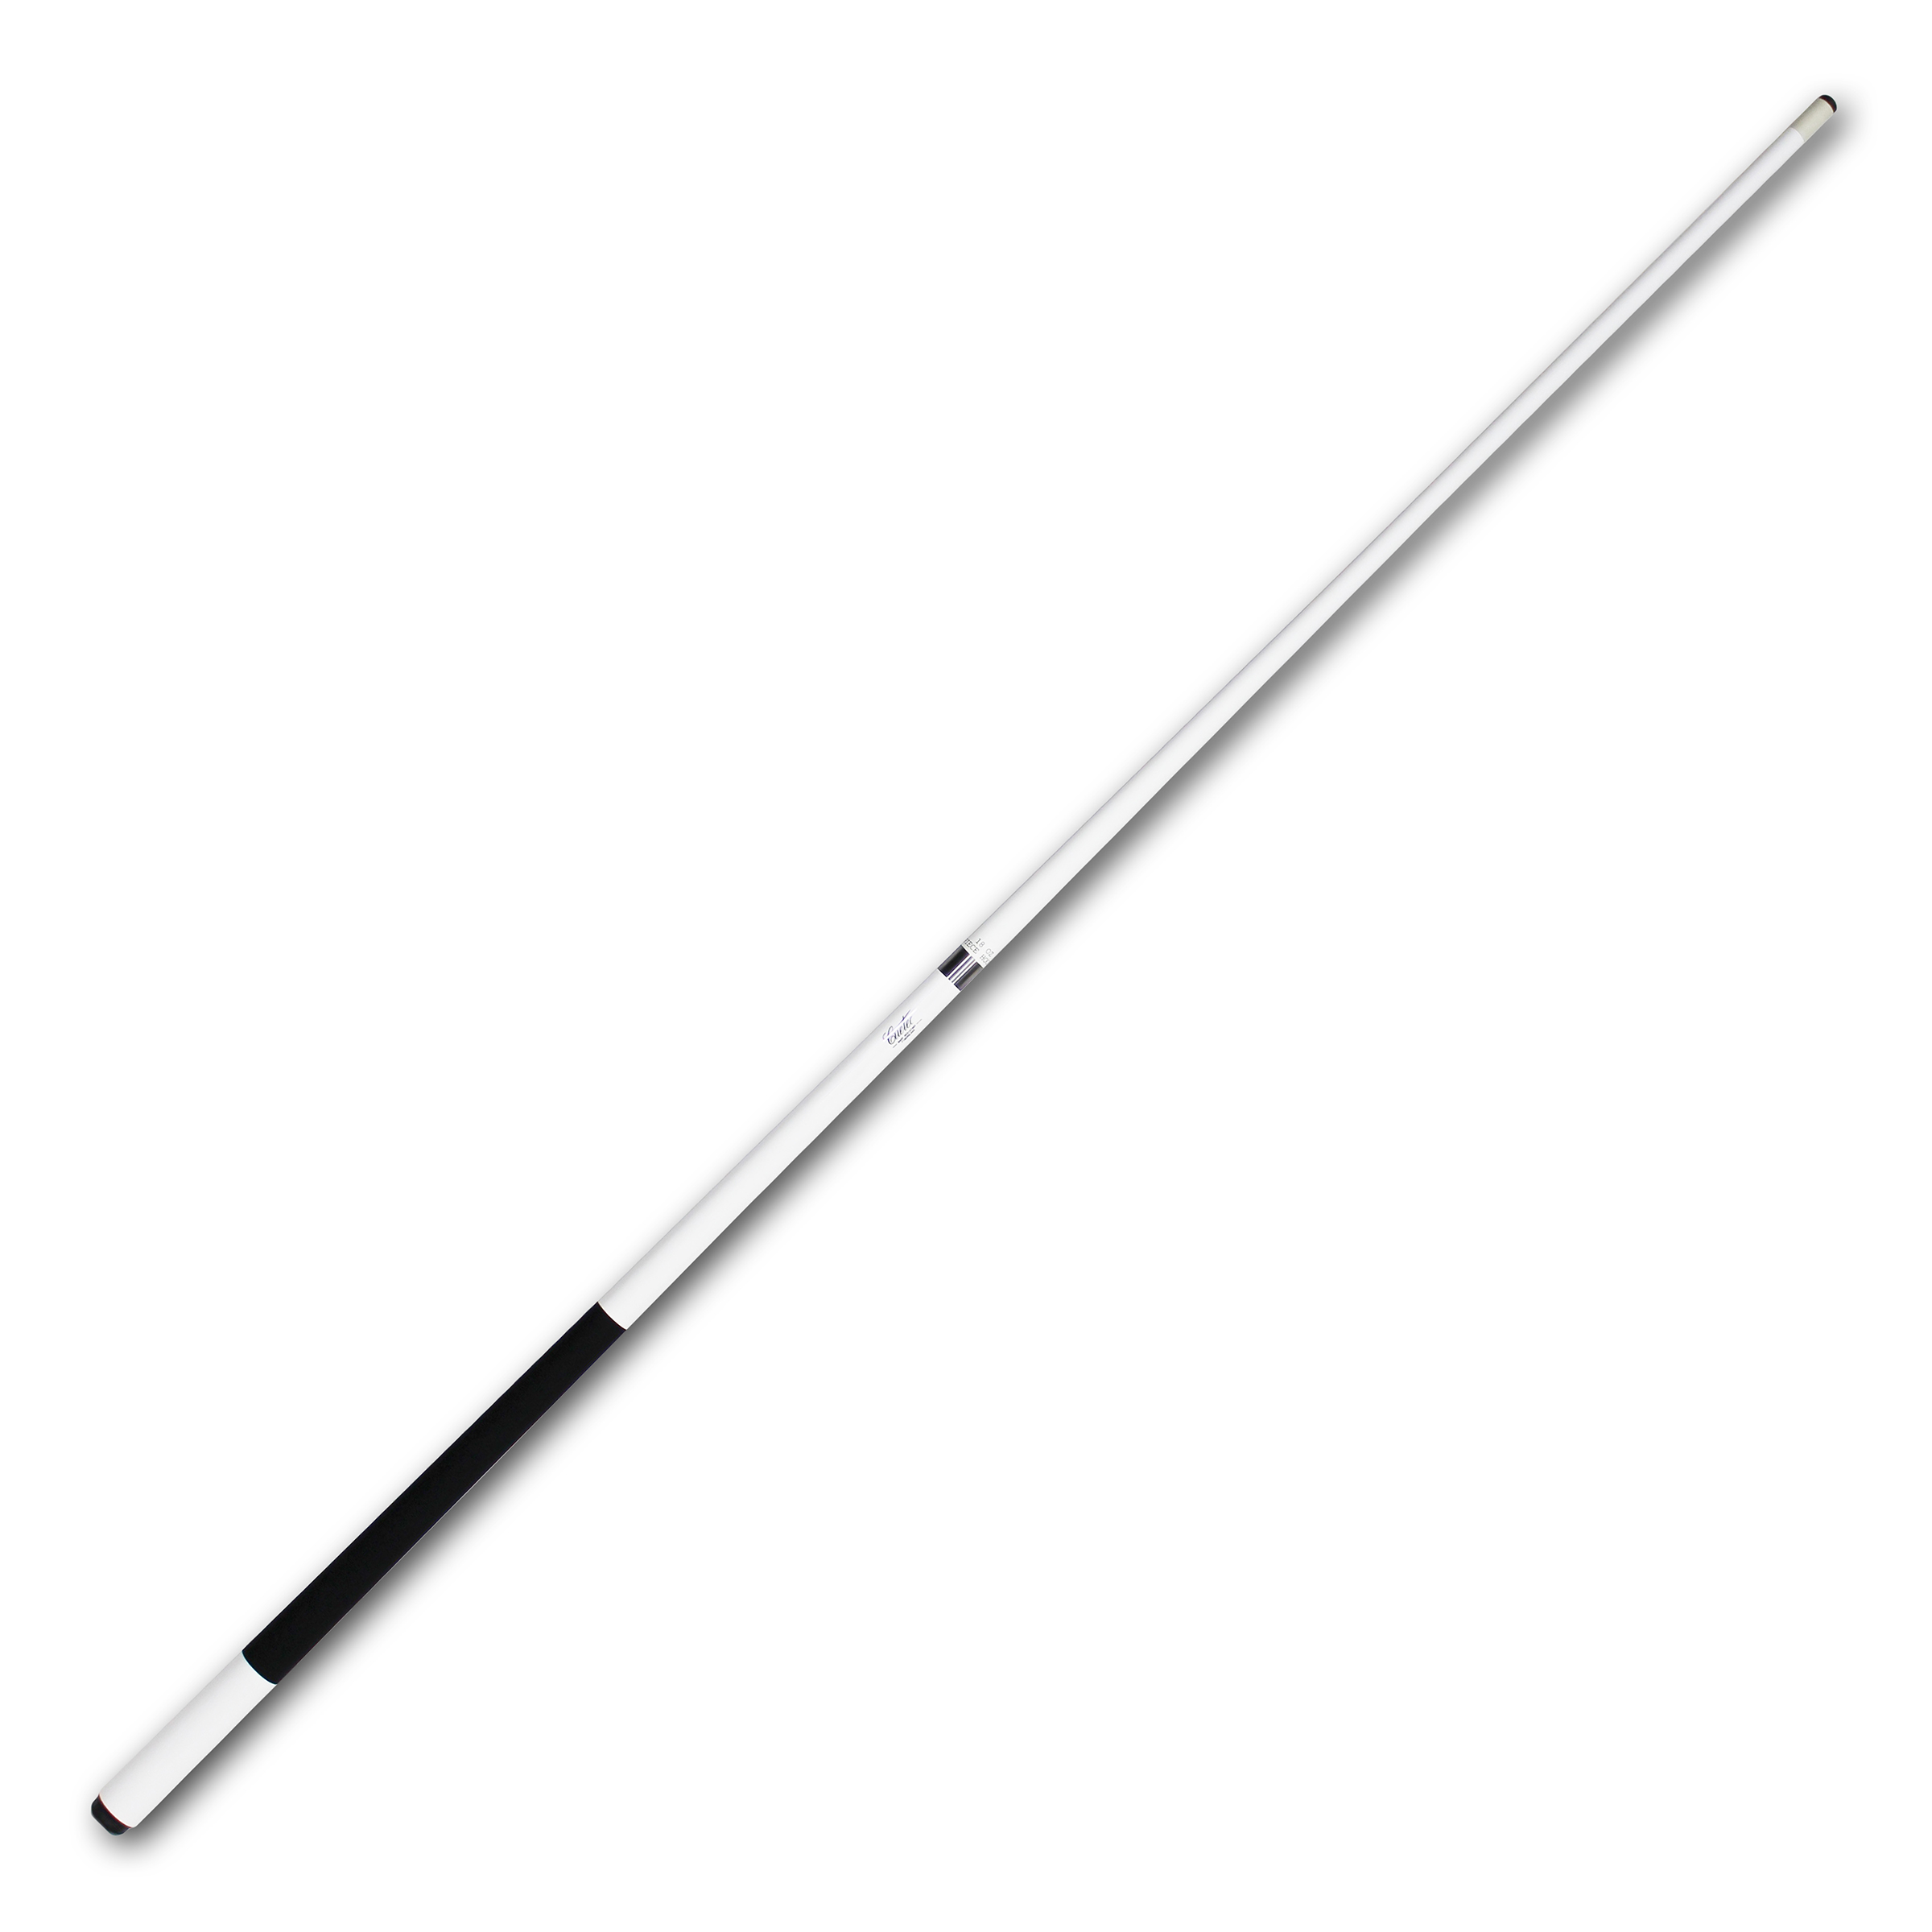 Details about   Balance Rite One Piece Short Pool Cue 48" Heavy Weighted w/ FREE Shipping 